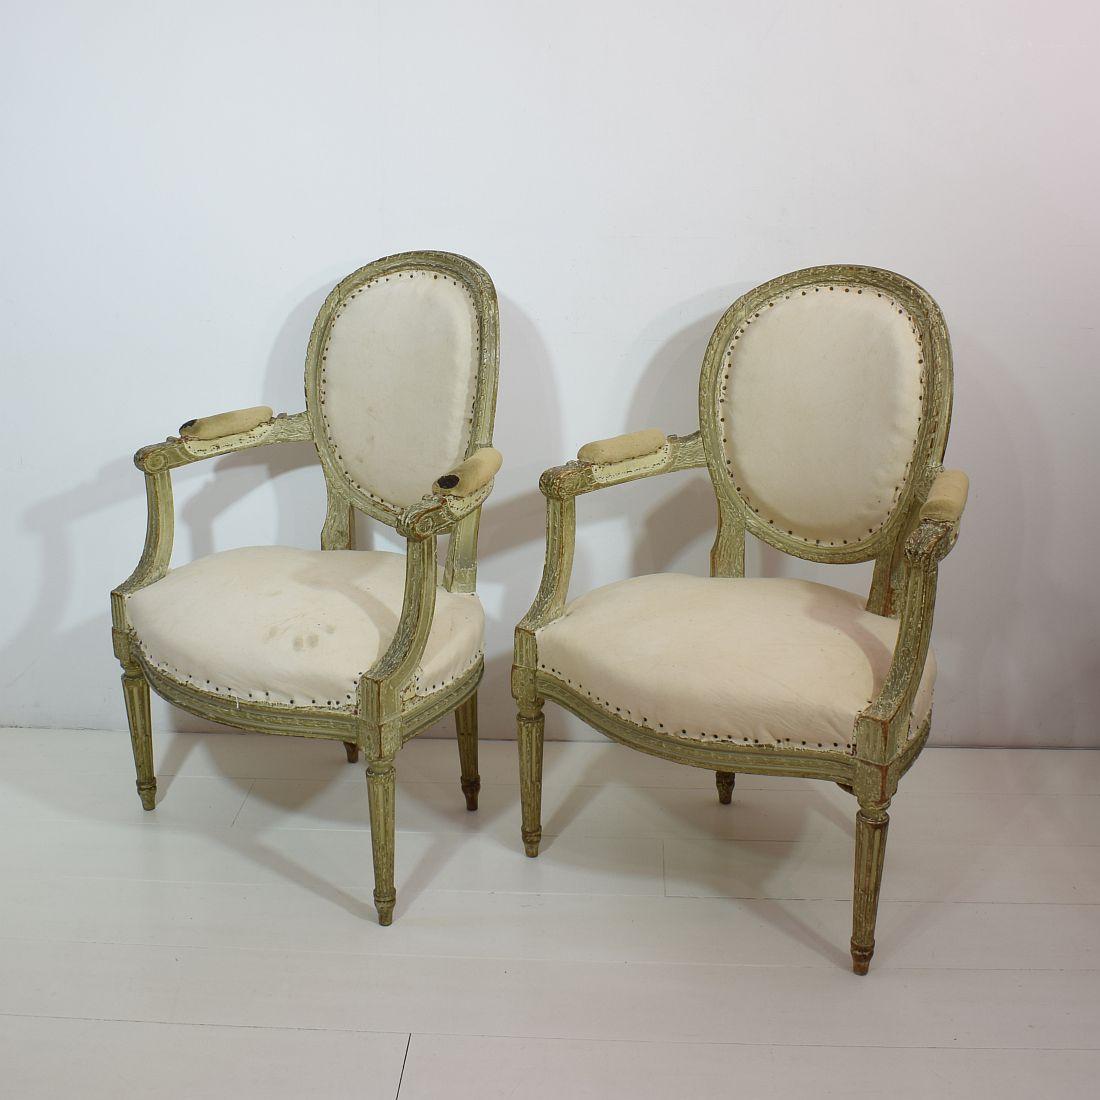 Beautiful pair of Louis XVI chairs with stunning old color,
France, 18th century. At this moment in their underwear.
Measures: Seat height is 44 cm. Weathered, small losses and old repairs.
Despite of their high age, the chairs are relative